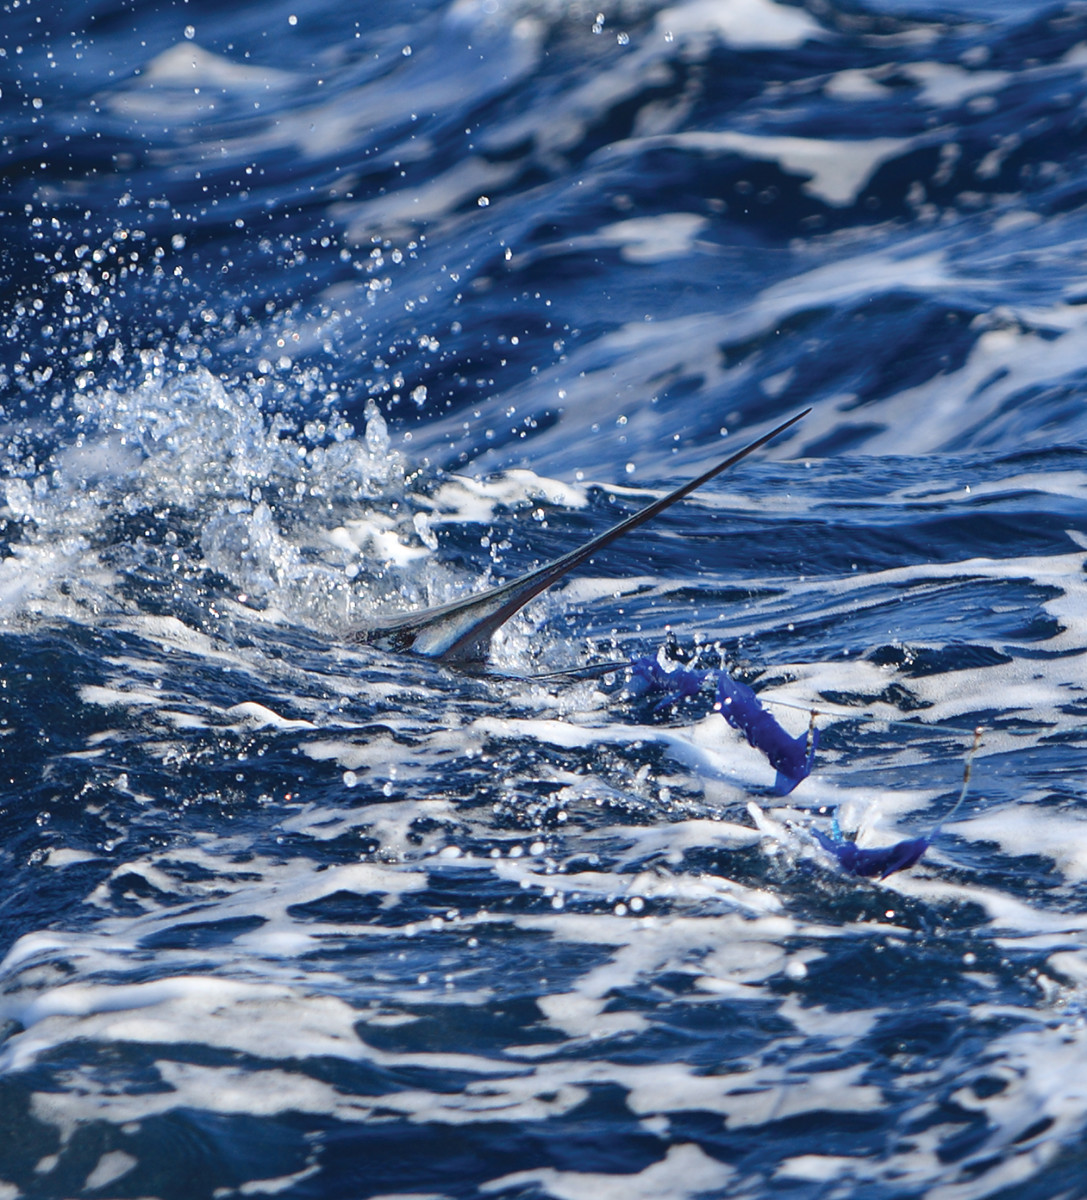 A white marlin comes in on a teaser.